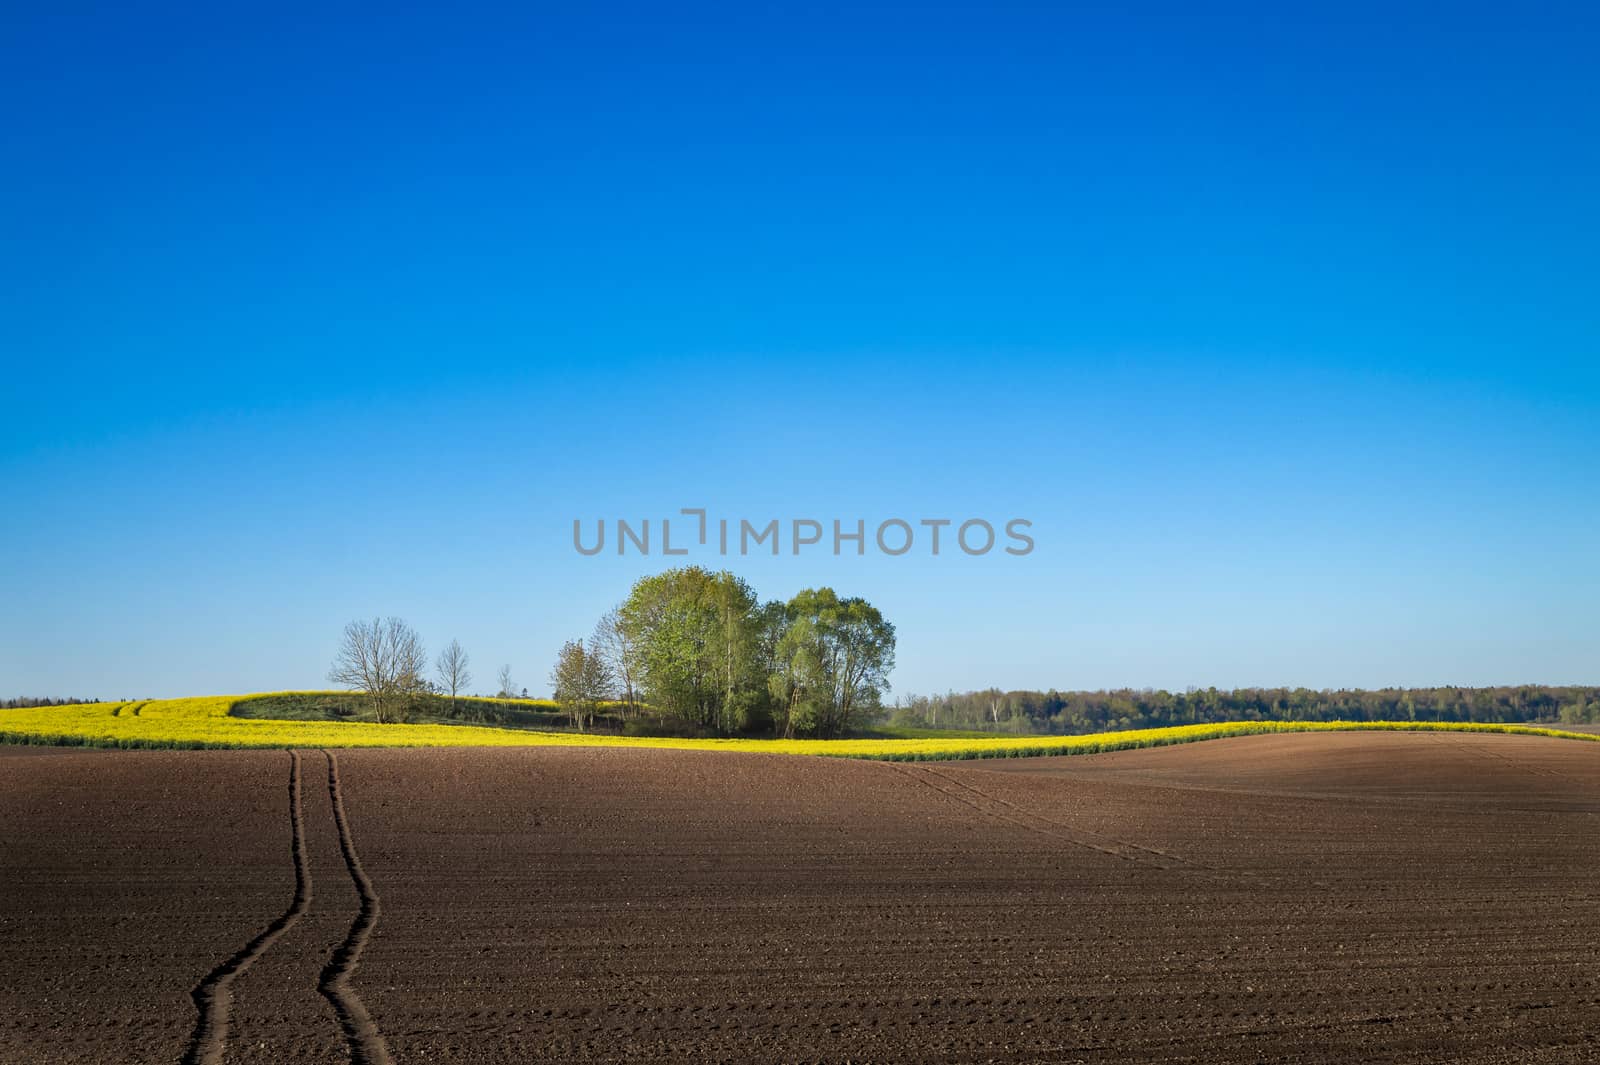 Vehicle tracks through a freshly ploughed agricultural field with rich brown fertile earth ready for planting the spring crop